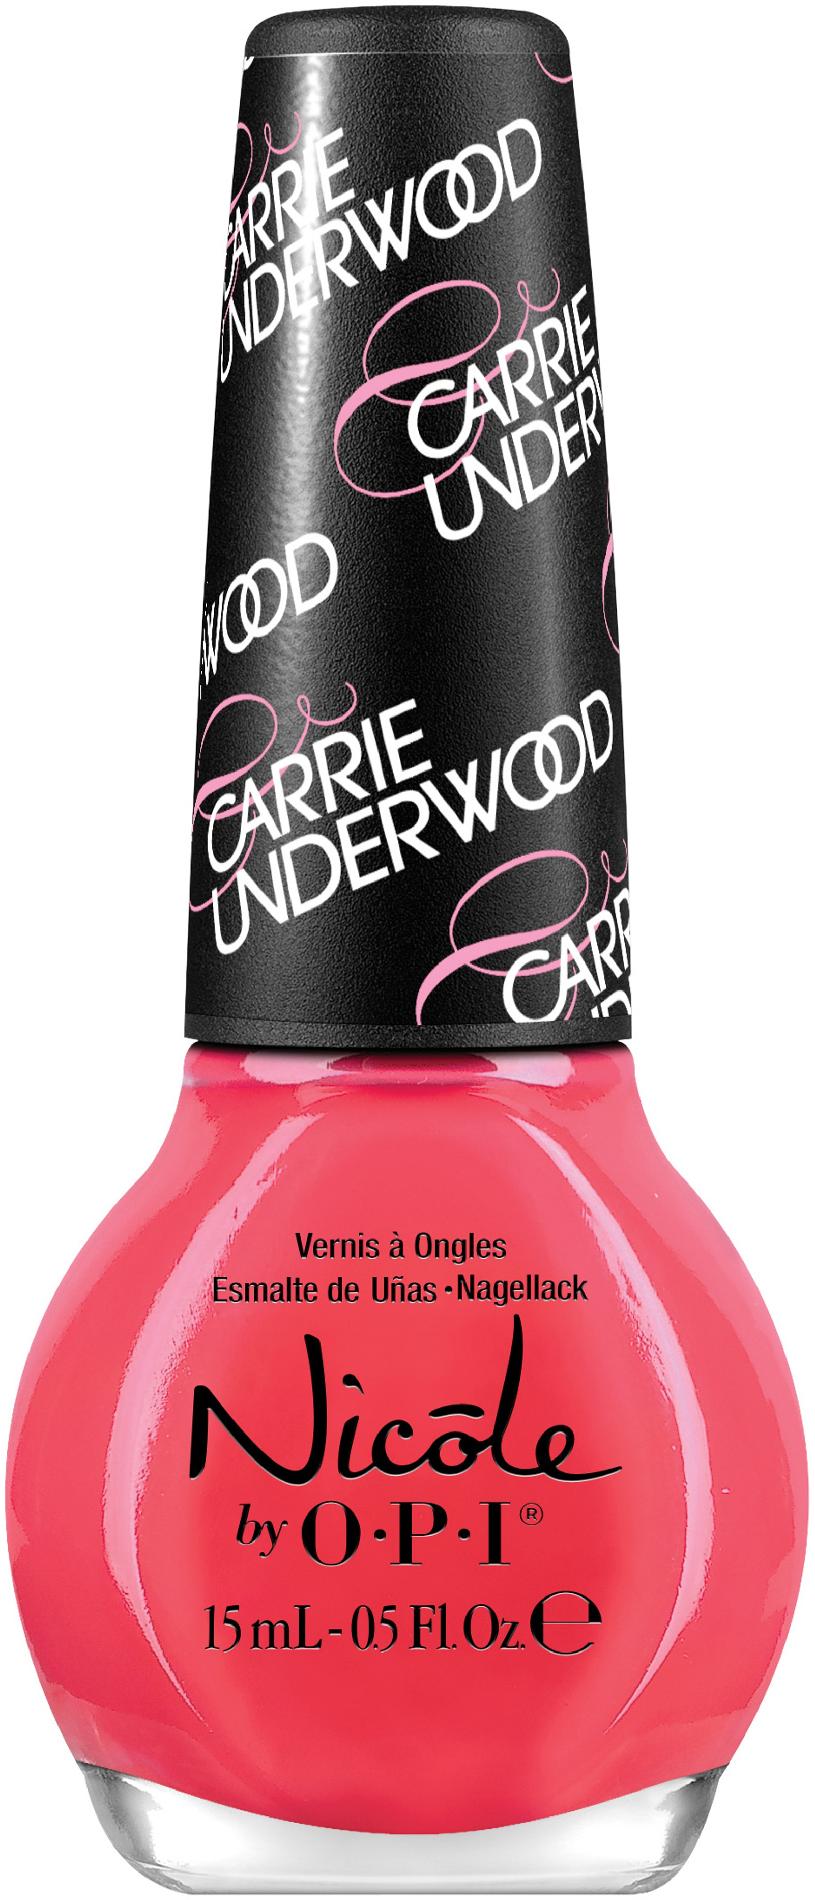 Carrie Underwood, Some Hearts, 0.5fl oz, (15 ml)